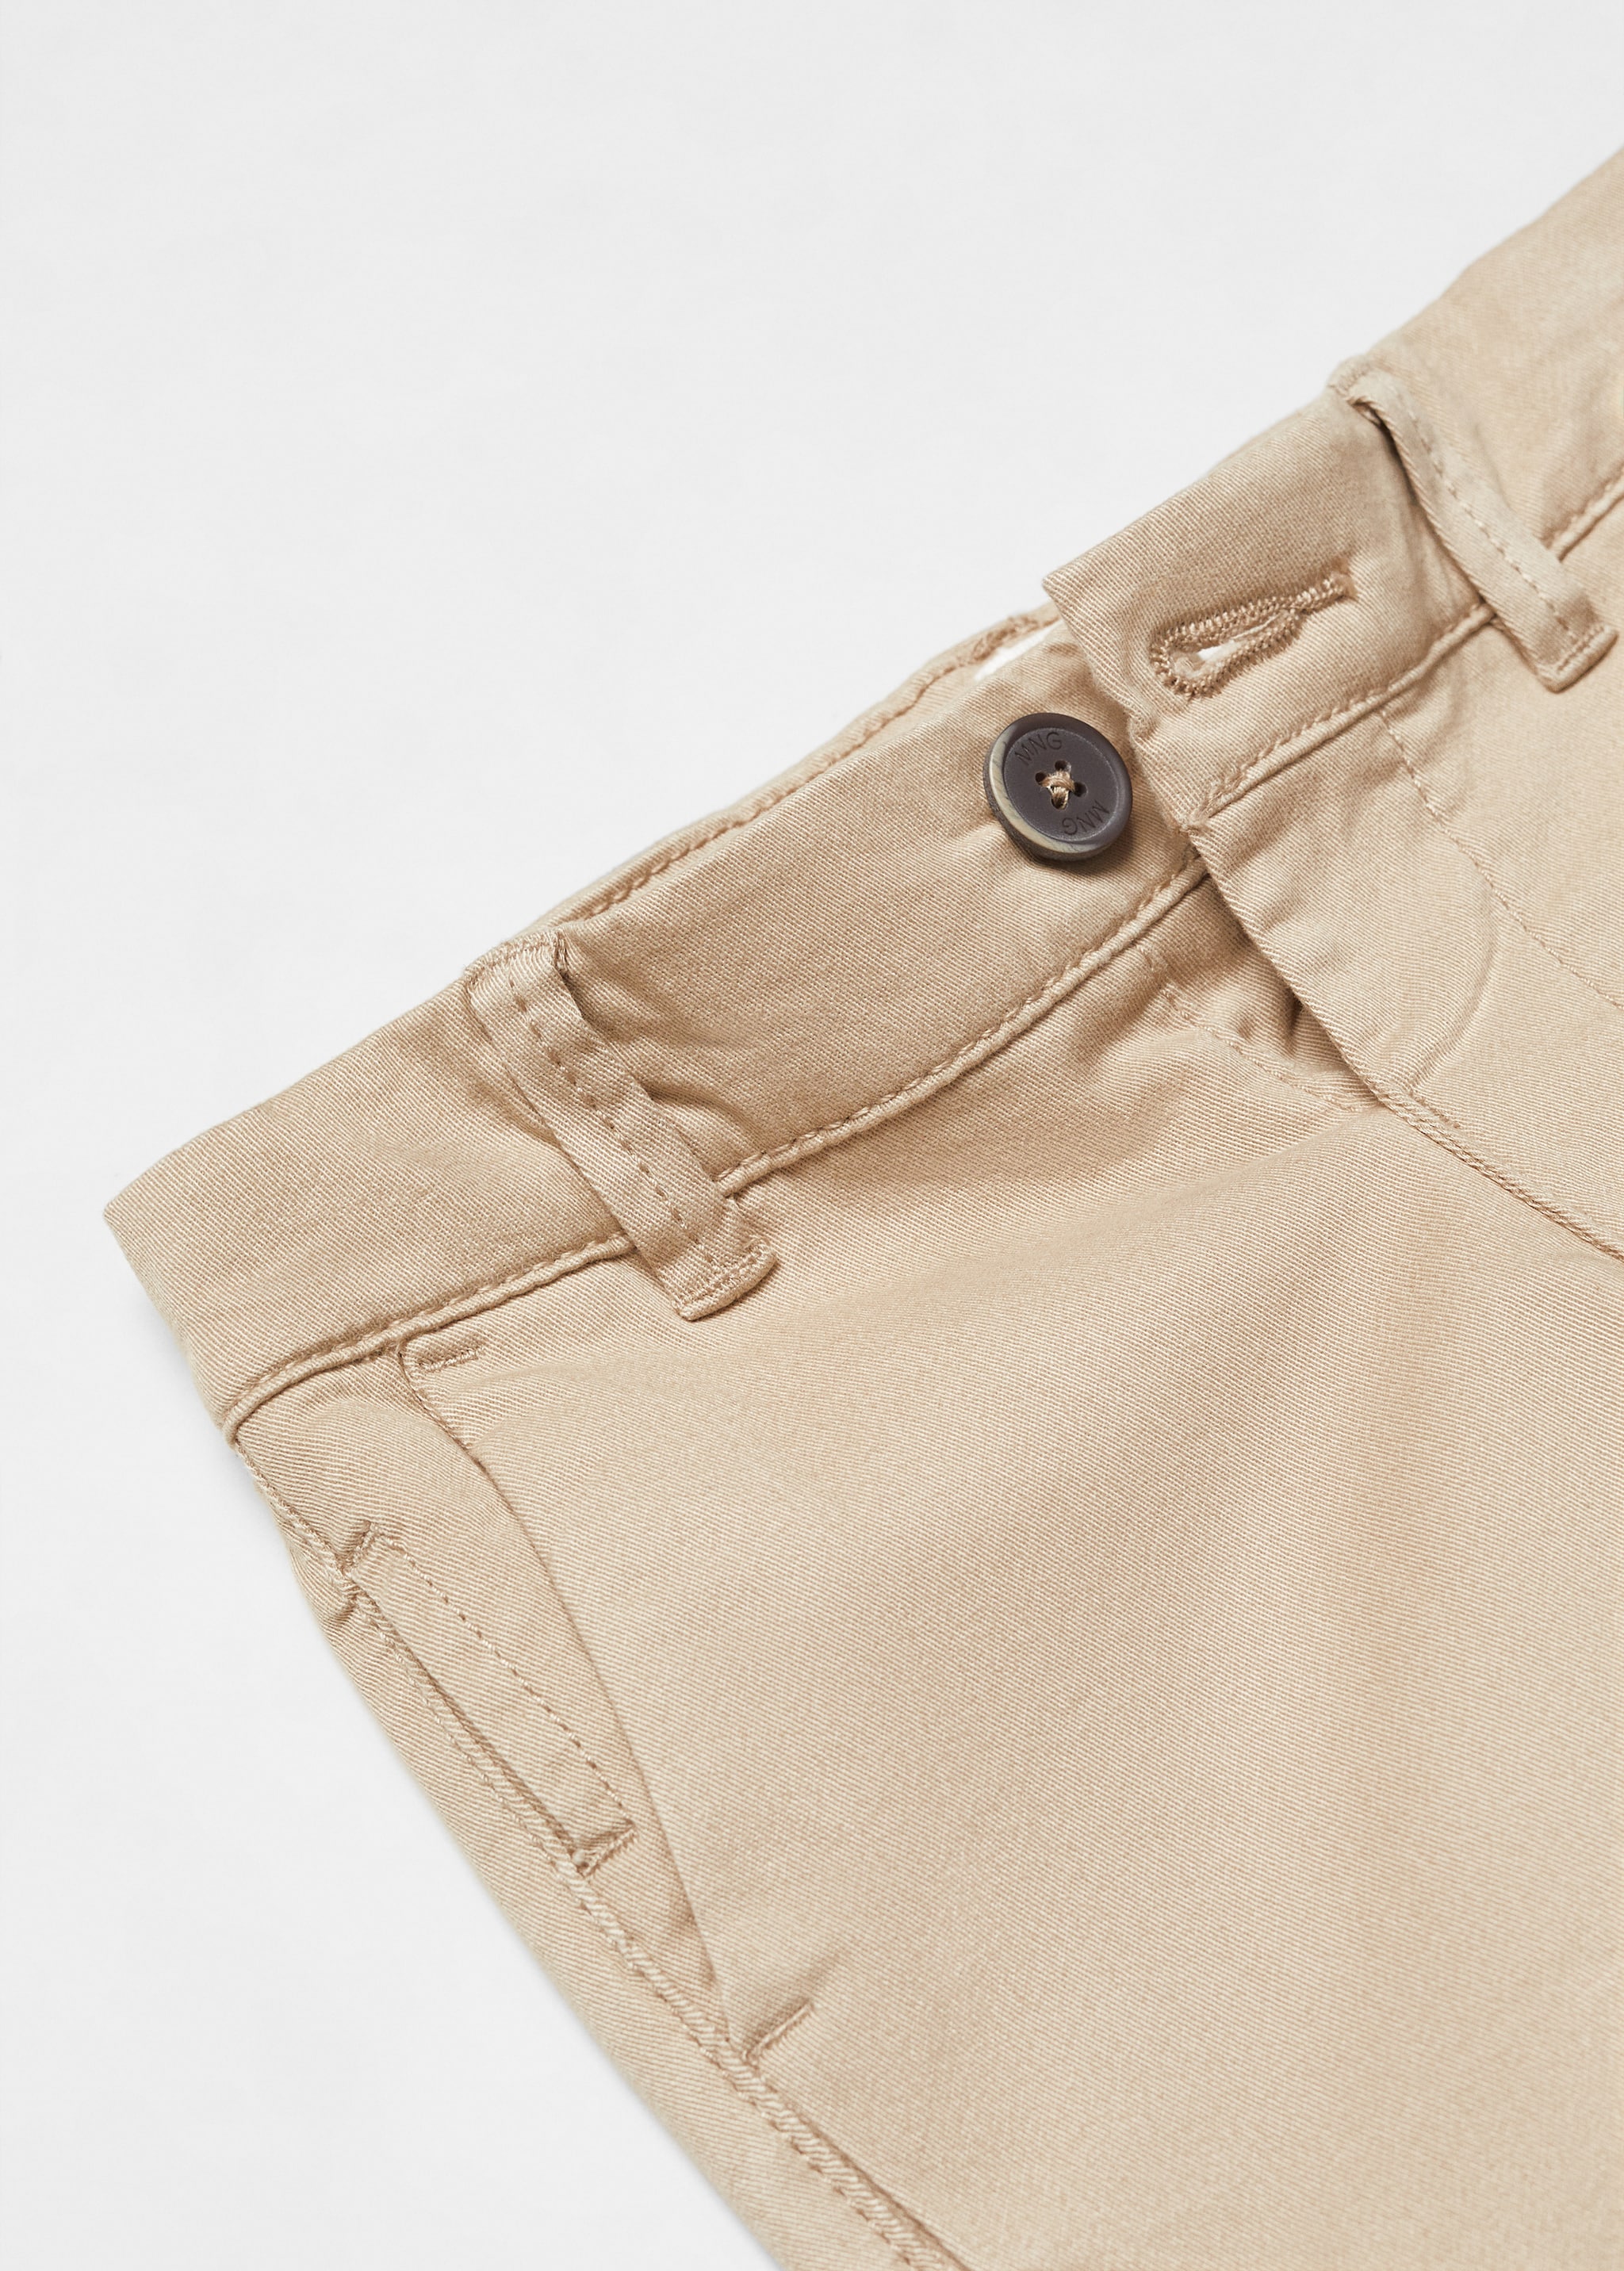 Cotton chinos - Details of the article 8